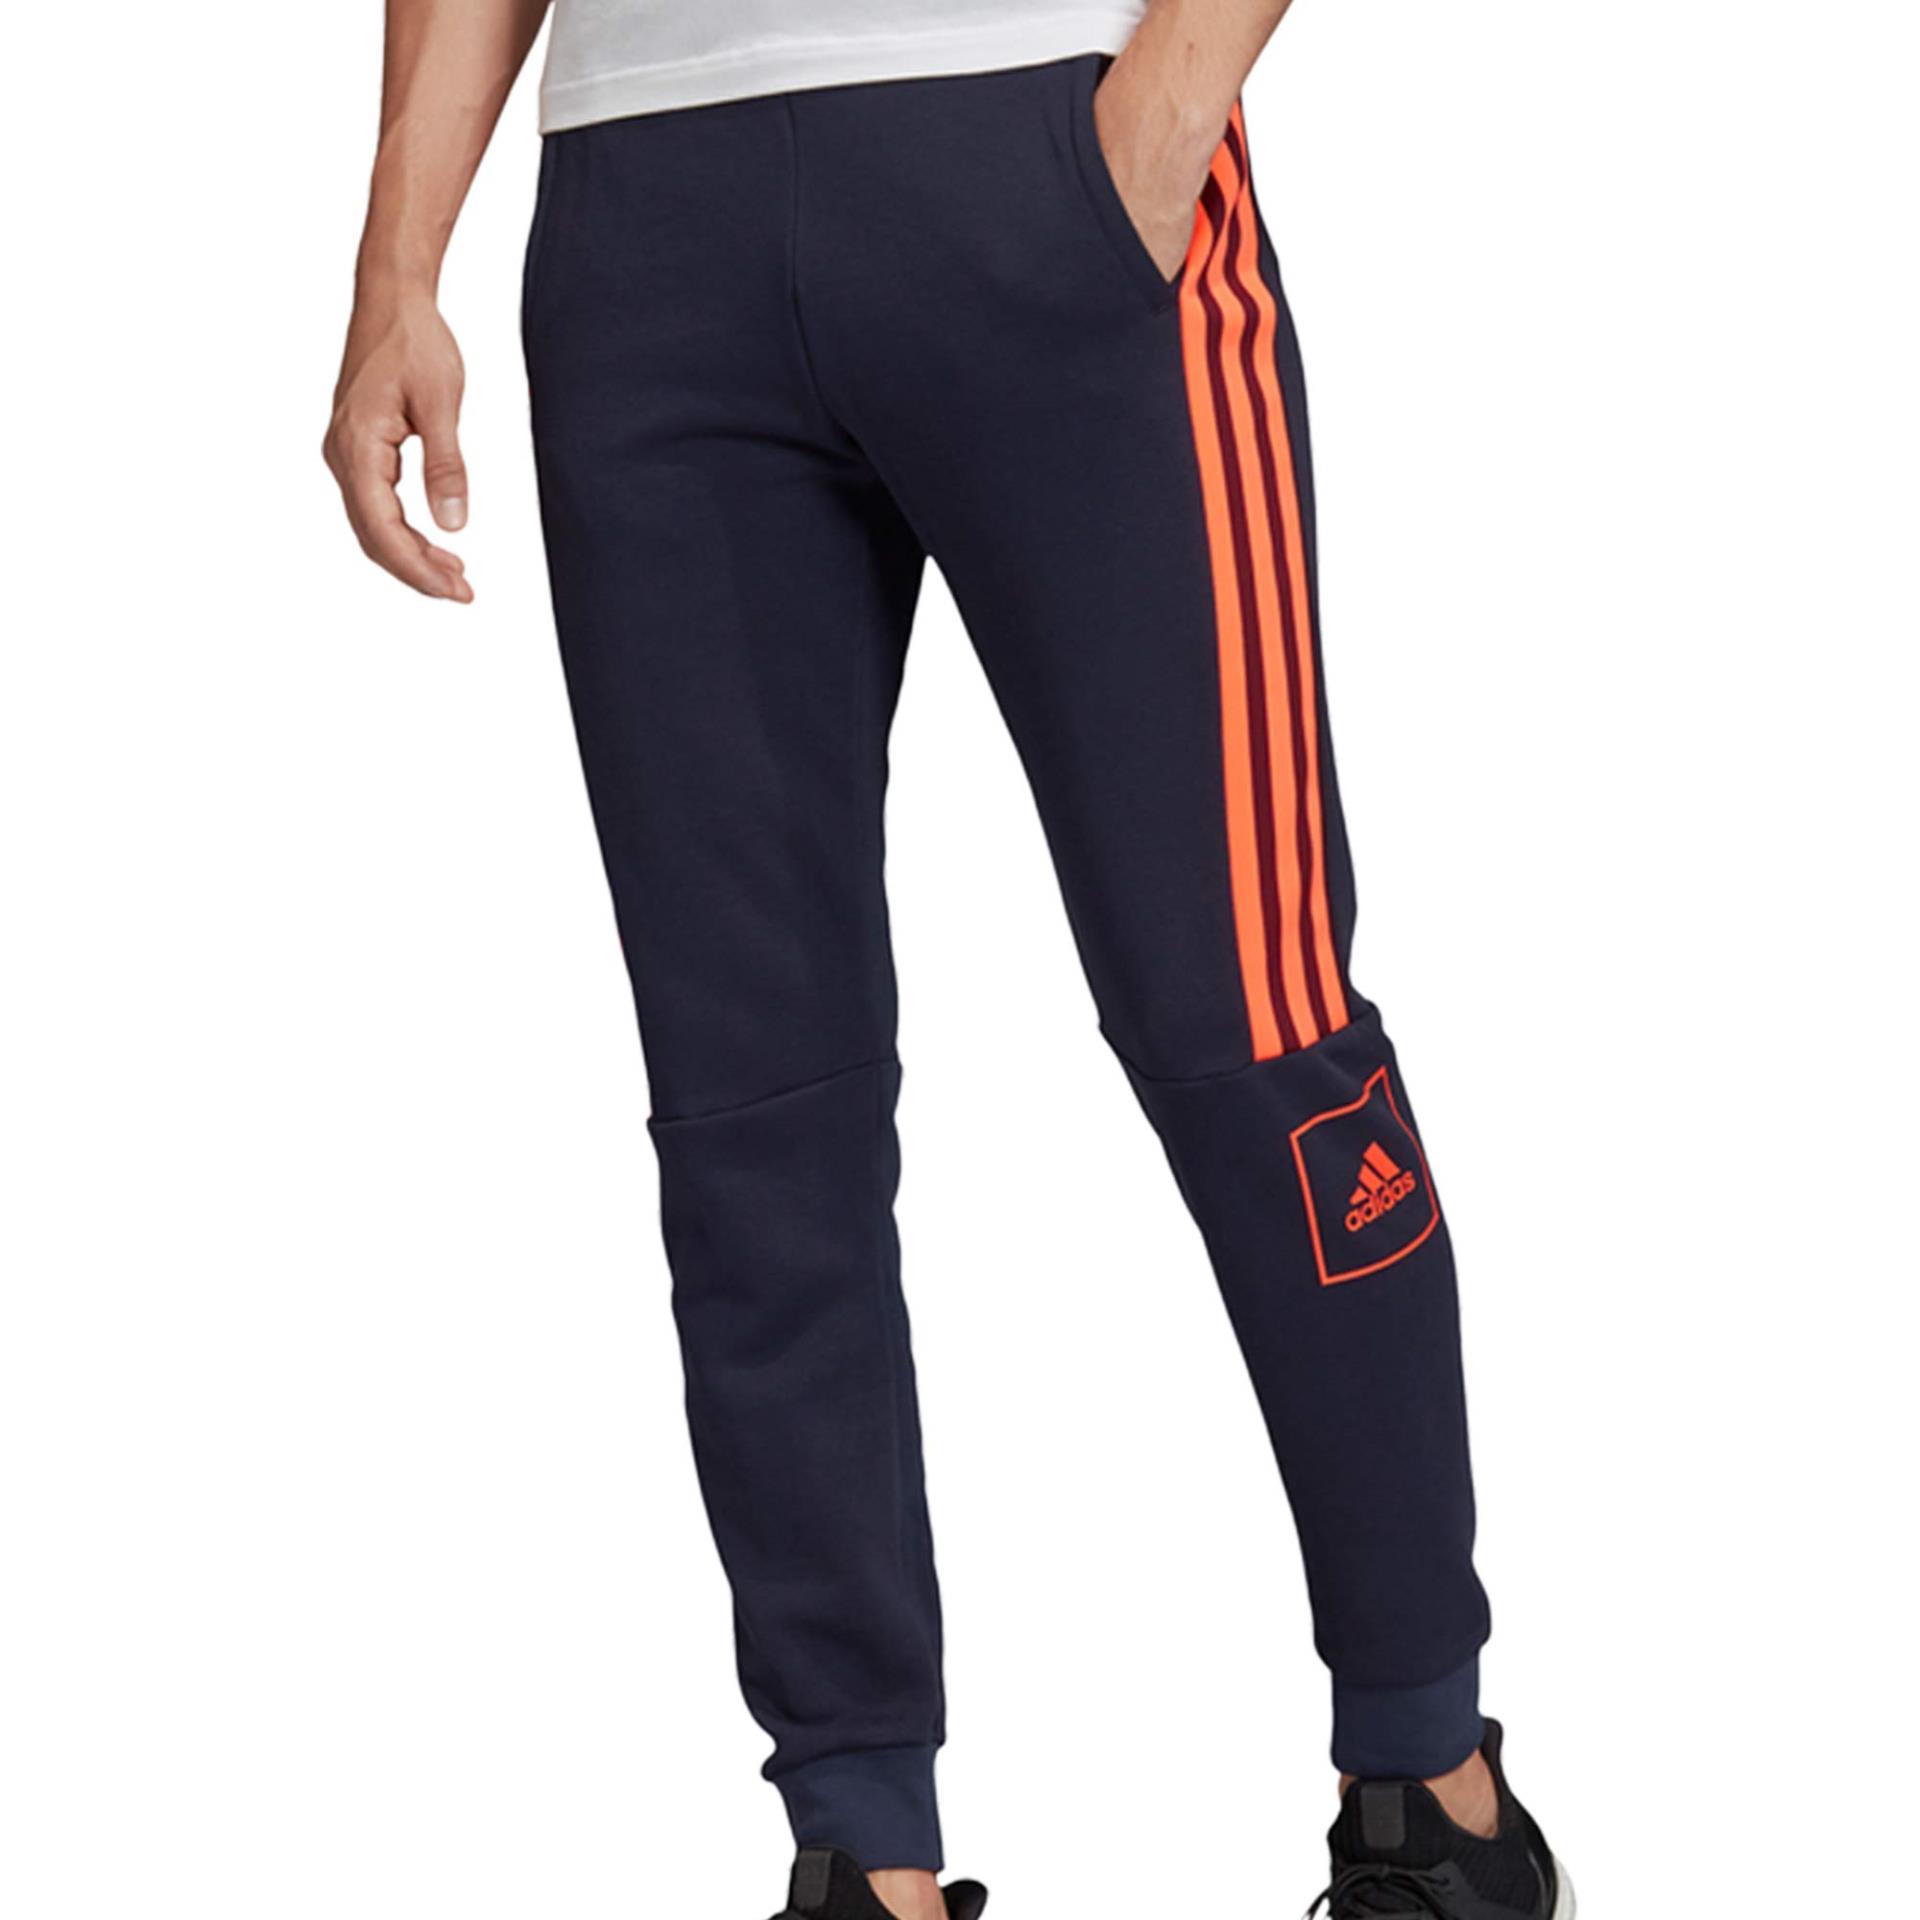 Buy Adidas Adicolor Classics 3-Stripes Pants from £24.99 (Today) – Best  Deals on idealo.co.uk